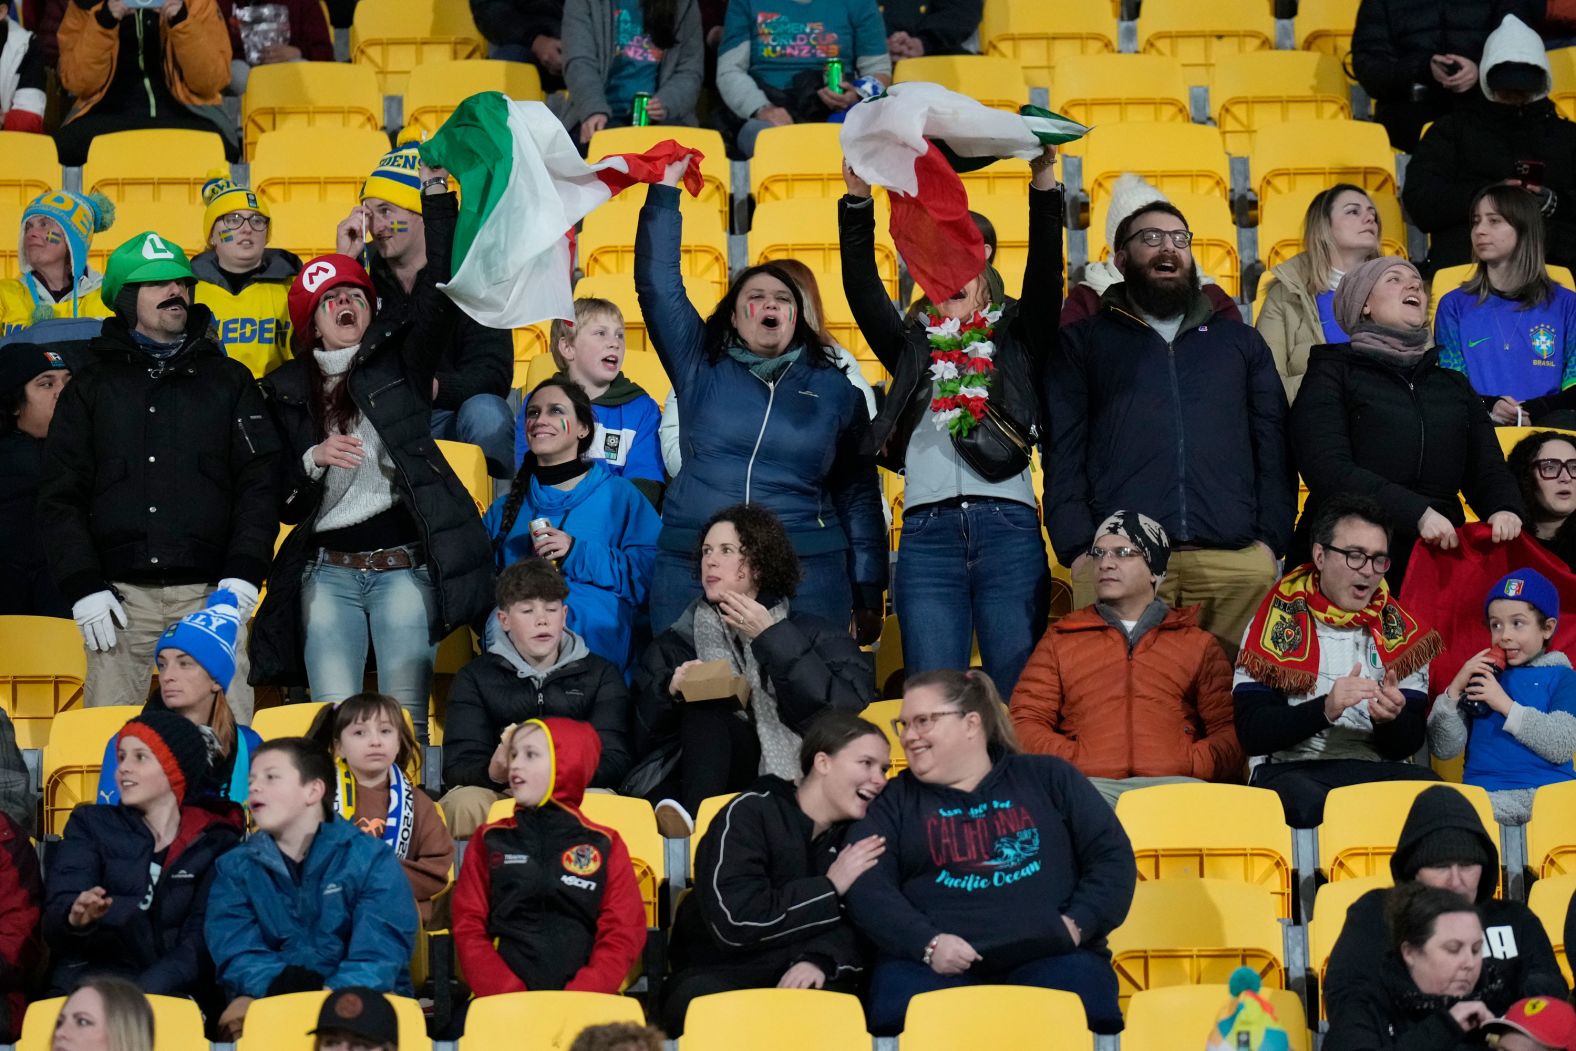 Italy fans cheer before their team's match against Sweden in Wellington, New Zealand.